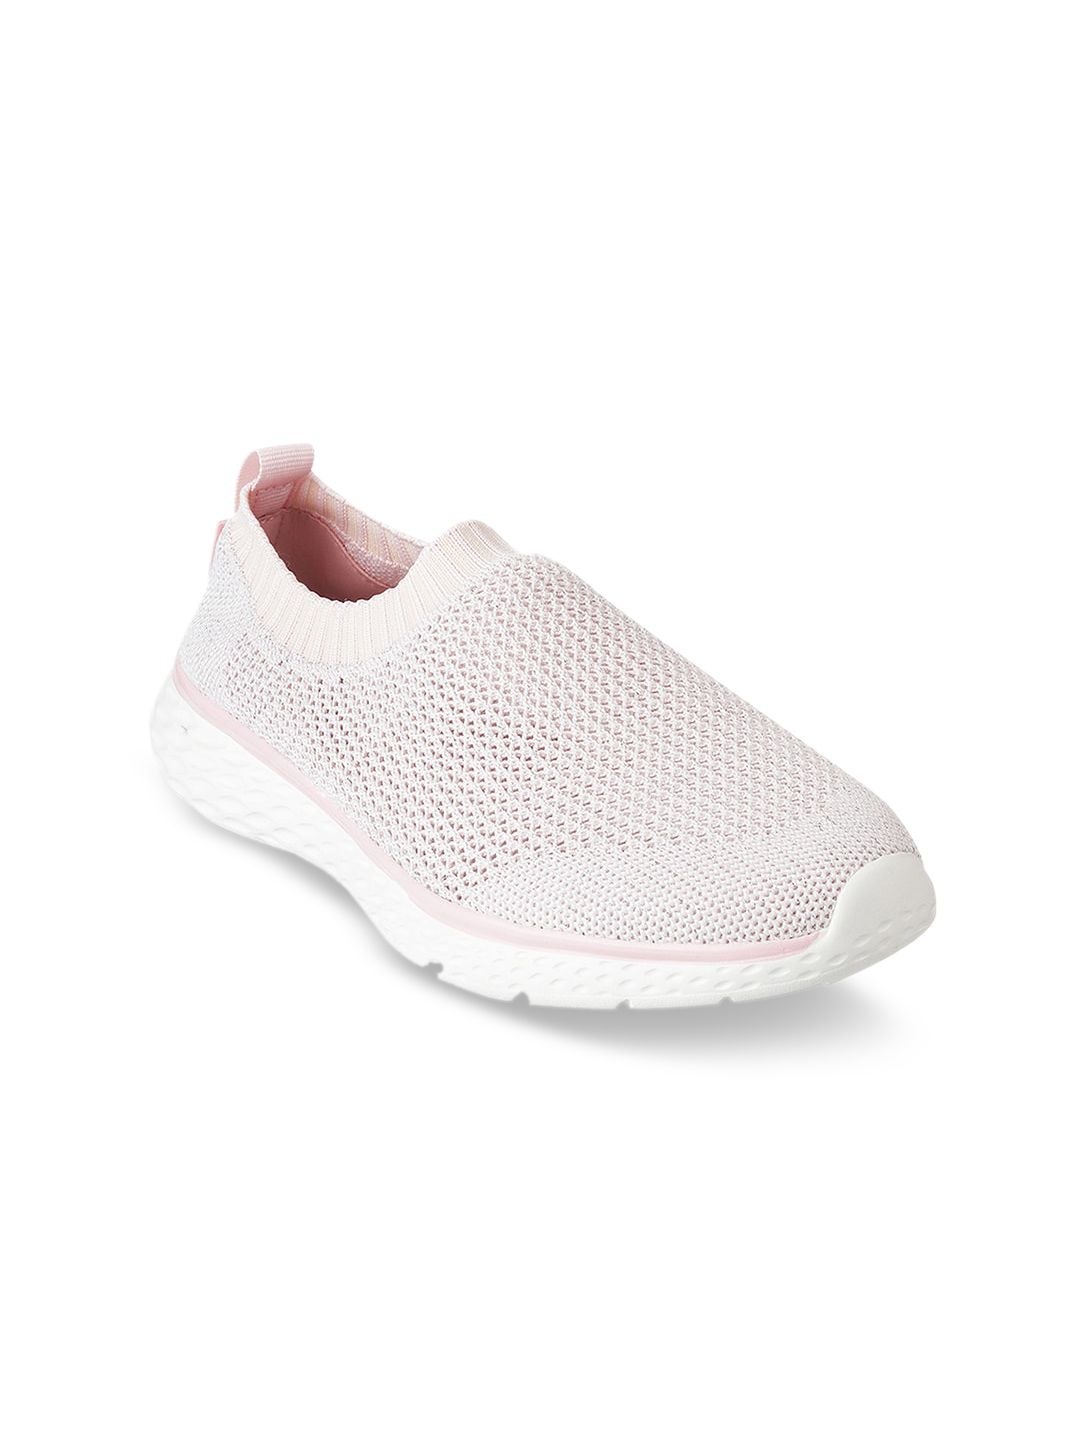 Mochi Women Pink Slip-On Sneakers Price in India